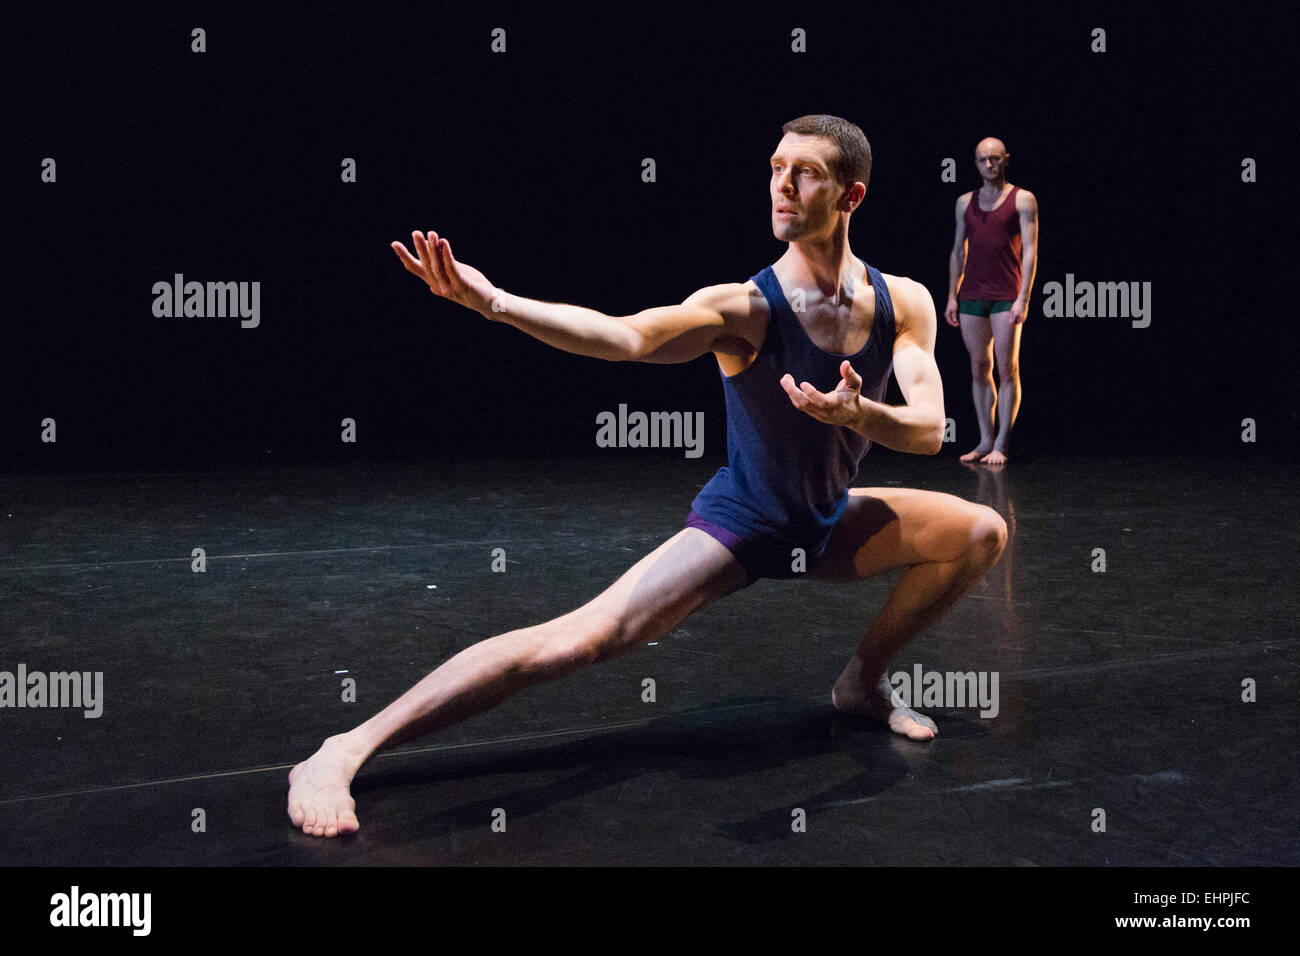 © Licensed to London News Pictures. 10/03/2015. London, England. Jonathan Goodard and Phil Sanger performing. The Yorke Dance Project presents 'Lingua Franca', the first new work in a decade from choreographer Robert Cohan CBE, on 10 March 2015 at the Lilian Baylis Studio and as part of Robert Cohan's 90th birthday at The Place on 27 March. Lingua Franca is part of the company's spring programme 'Figure Ground 2015'. Dancers: Jonathan Goddard, Phil Sanger, Laurel Dalley-Smith and Yolande Yorke-Edgell. Stock Photo